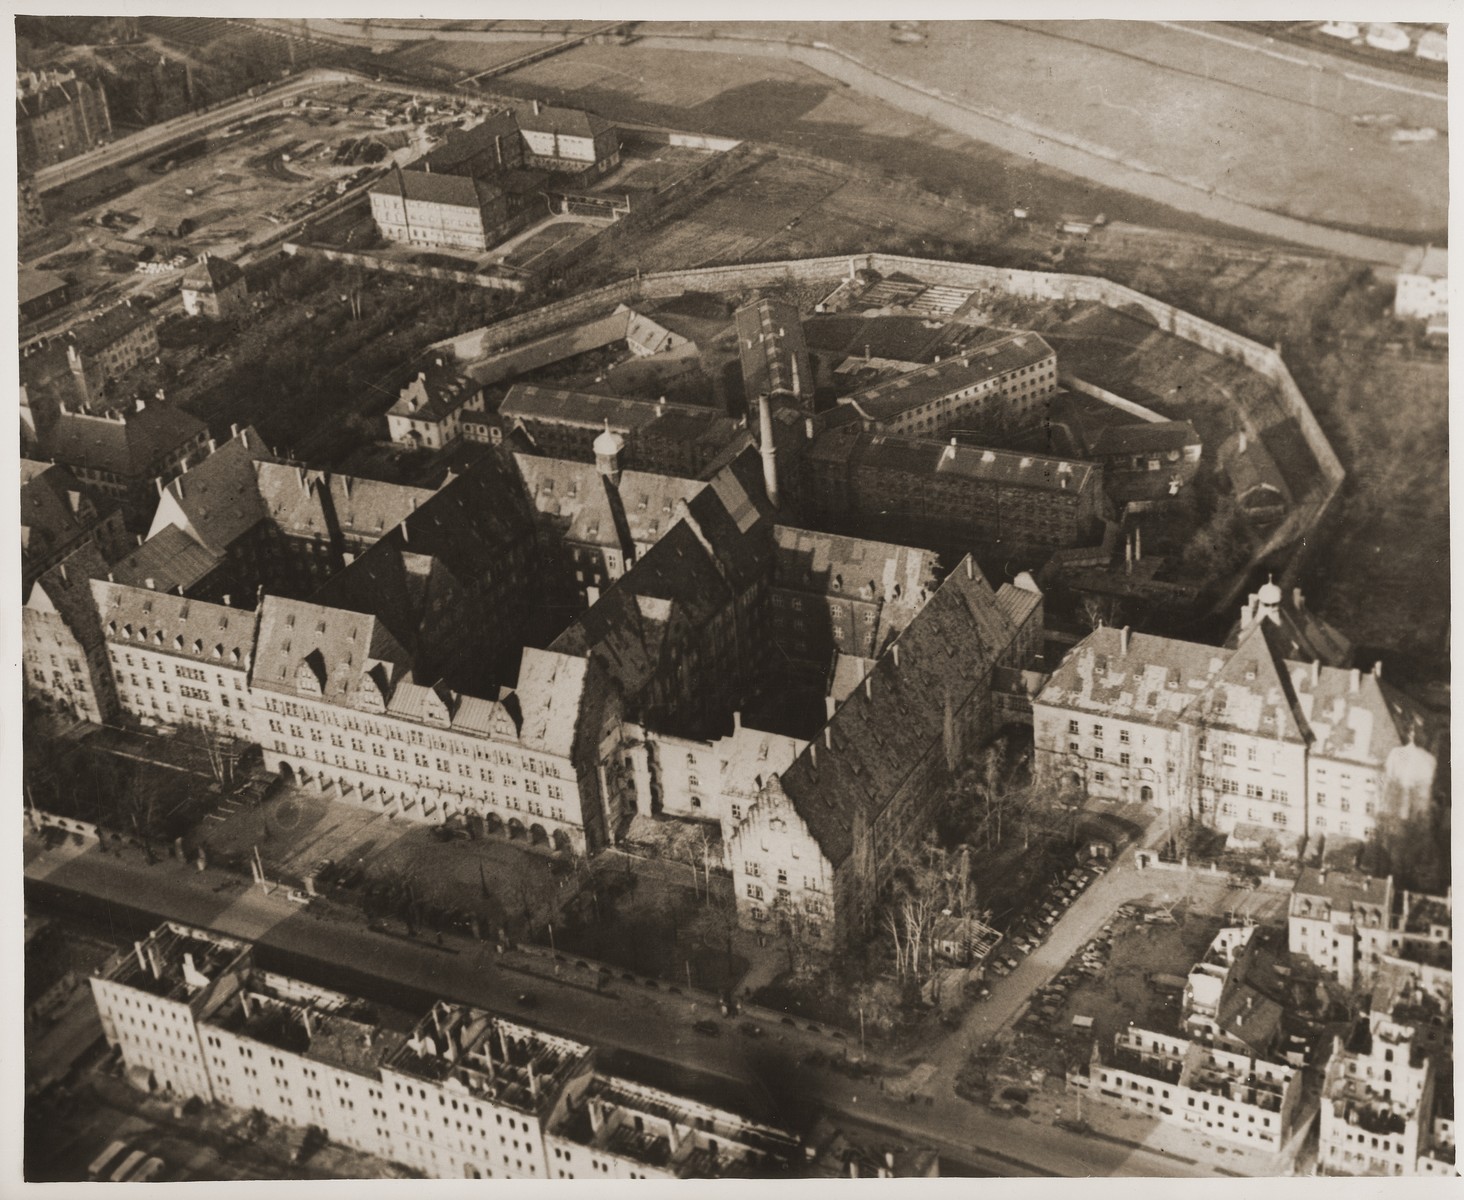 Aerial view of the Nuremberg Palace of Justice and prison, where the war crimes trial of the International Military Tribunal was held and its defendants incarcerated.  

In the foreground is the Palace of Justice.  The structure on the right that is connected to the the main building by a passageway, is where the actual courtroom is located.  The main part of the Palace of Justice houses the offices of those working on the IMT.  In the background are the four wings of the Nuremberg prison.  The IMT defendants are housed in the far right wing; the witnesses in the left wing; and other prisoners in the two center wings.